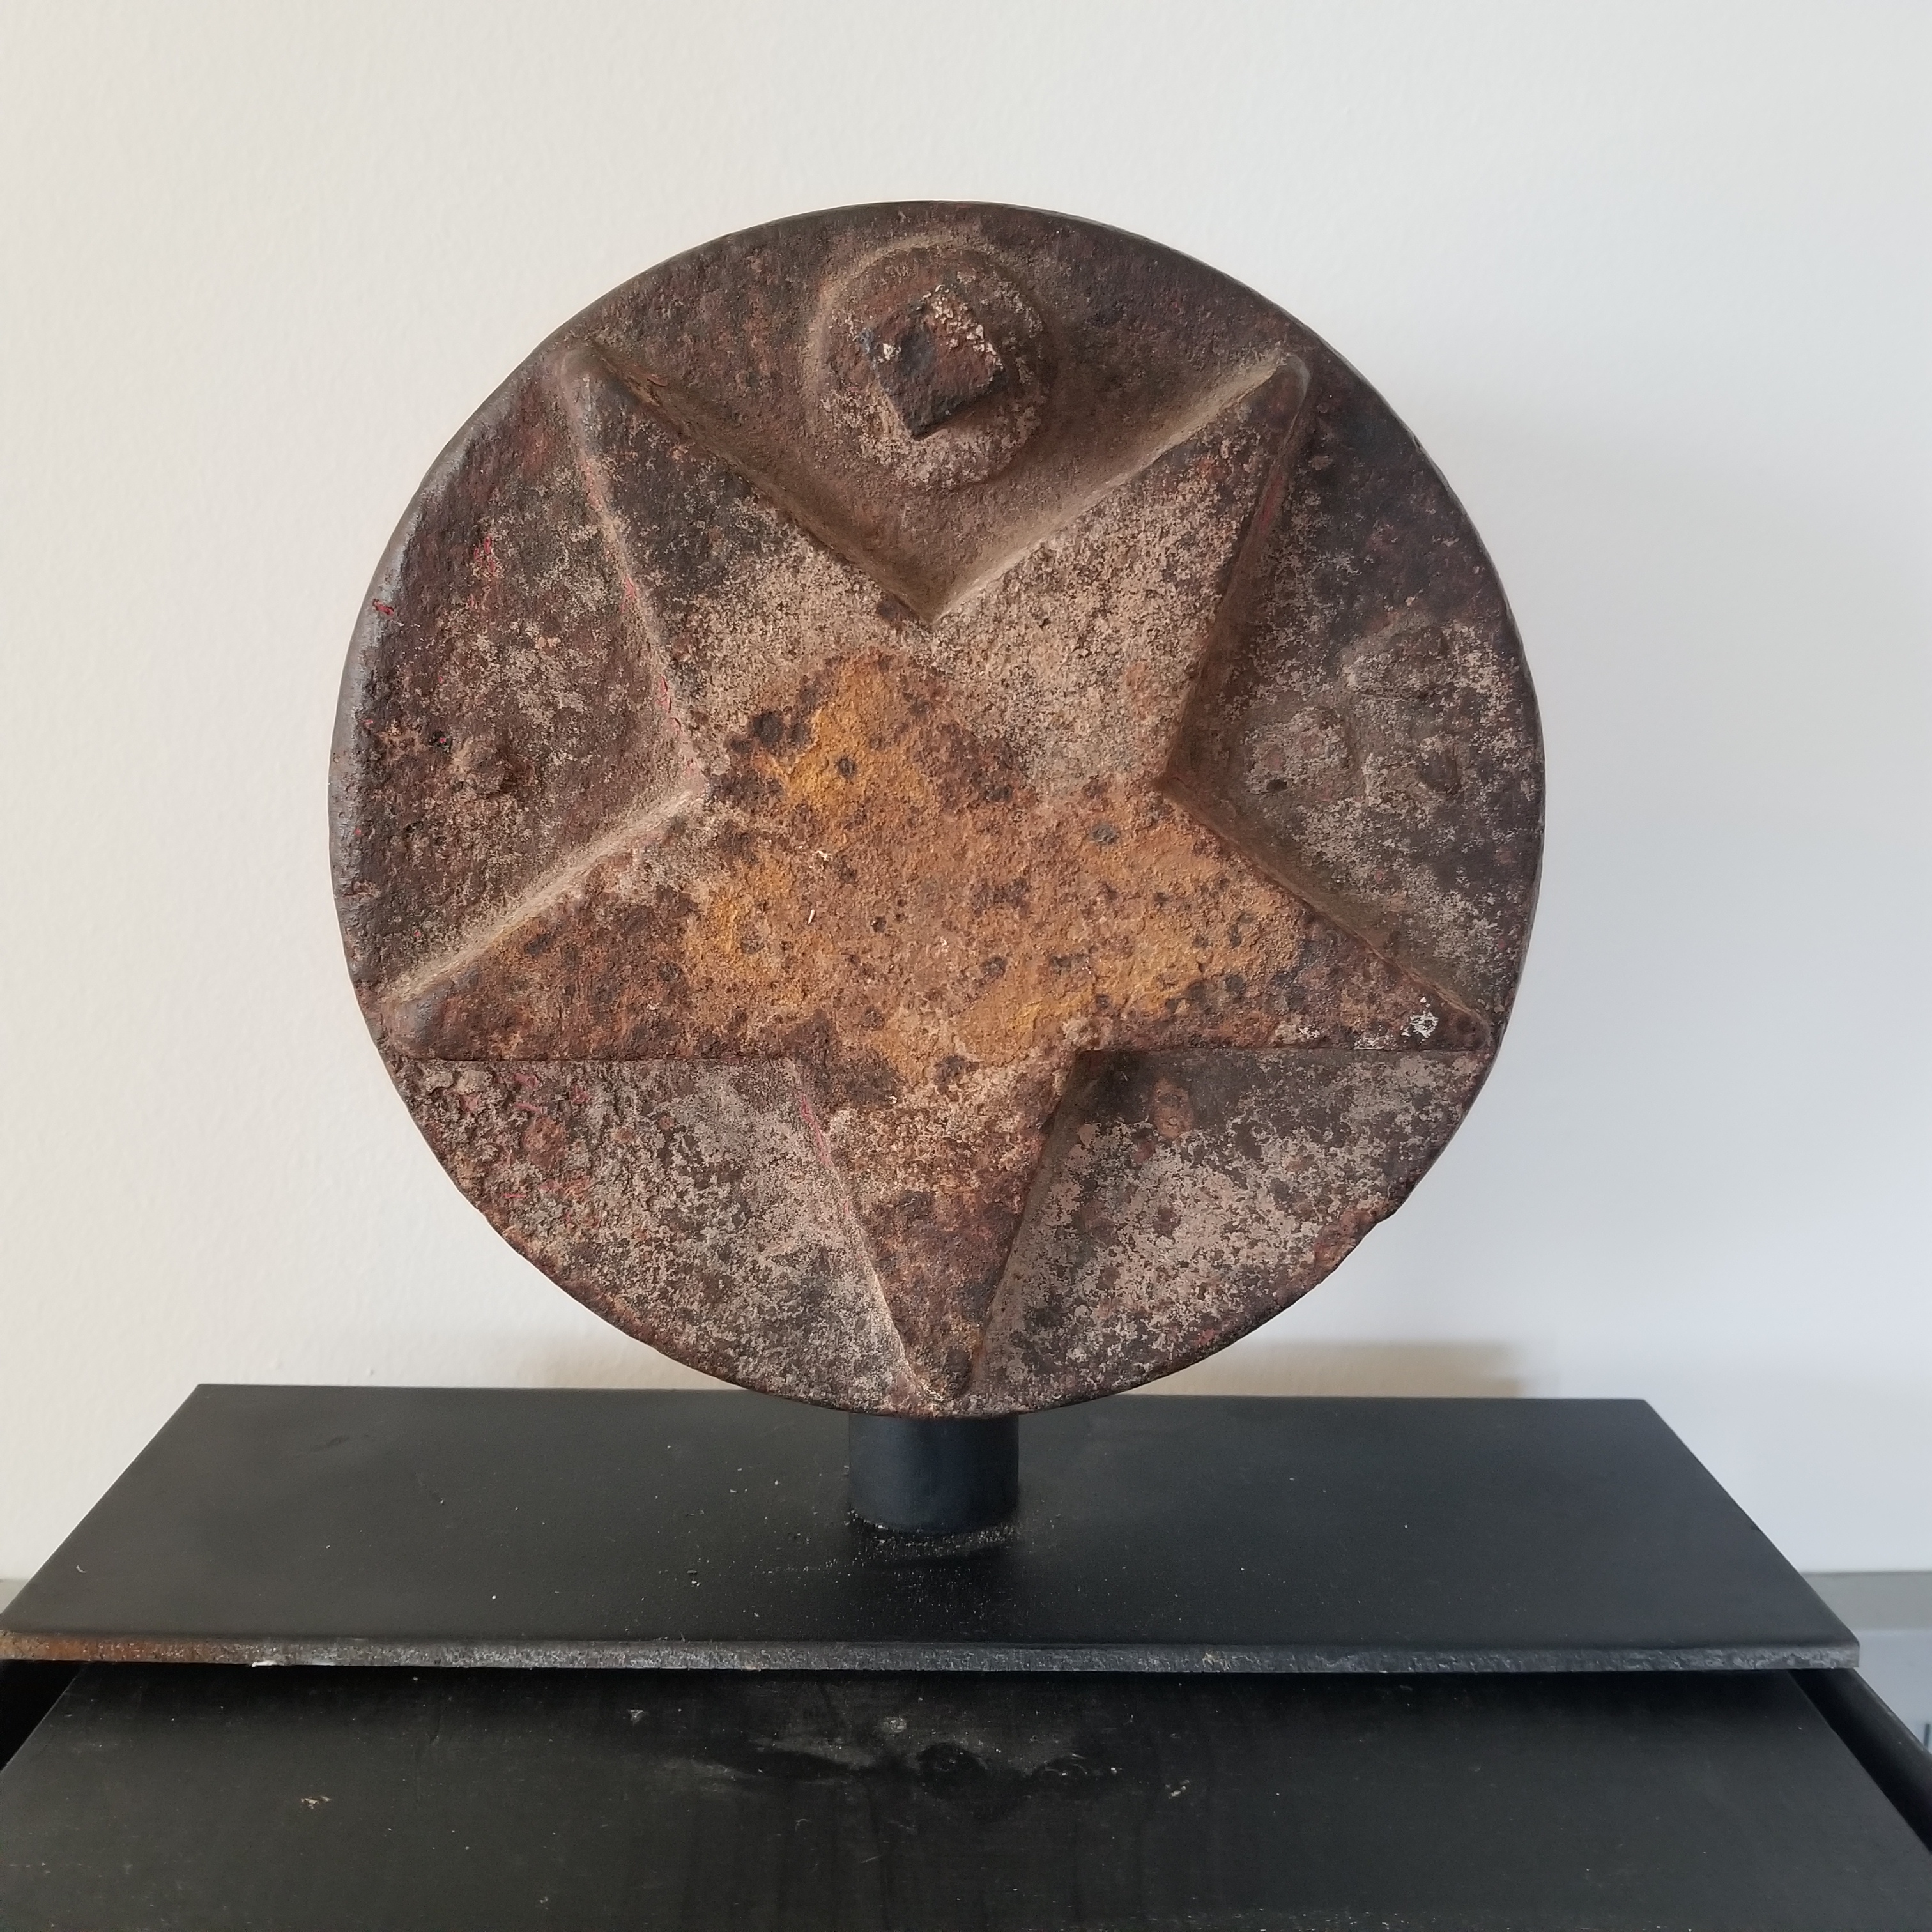 THIS WEIGHT IS A DISC WITH A  5 POINT STAR